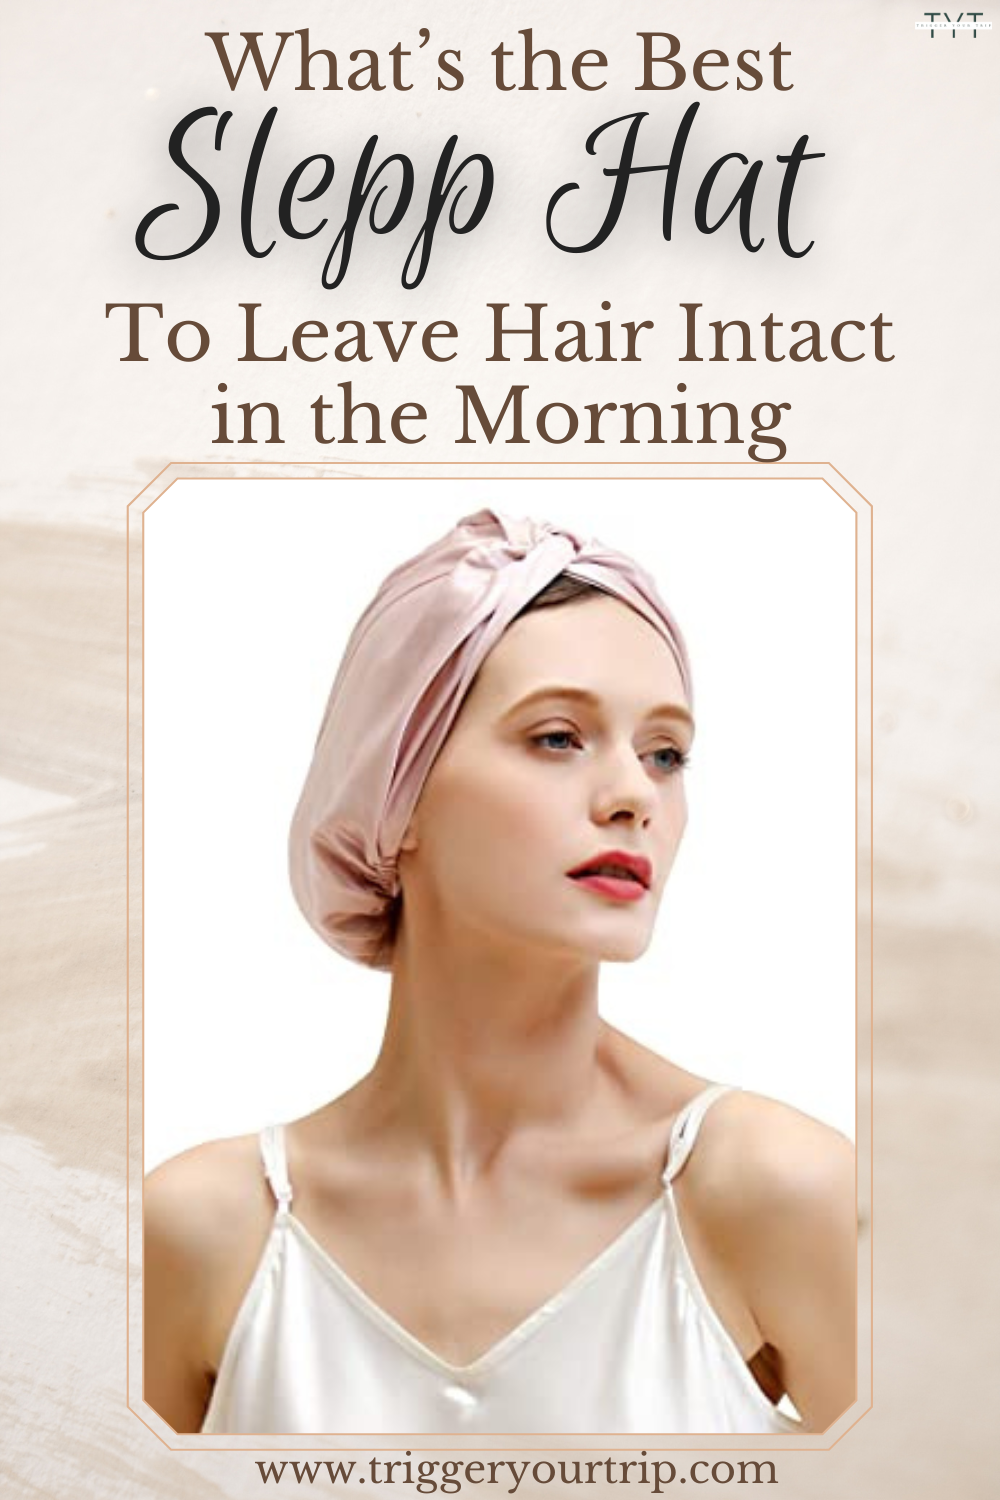 night cap, sleeping cap, sleep cap, night caps for great hair in the morning (or cancer patients)